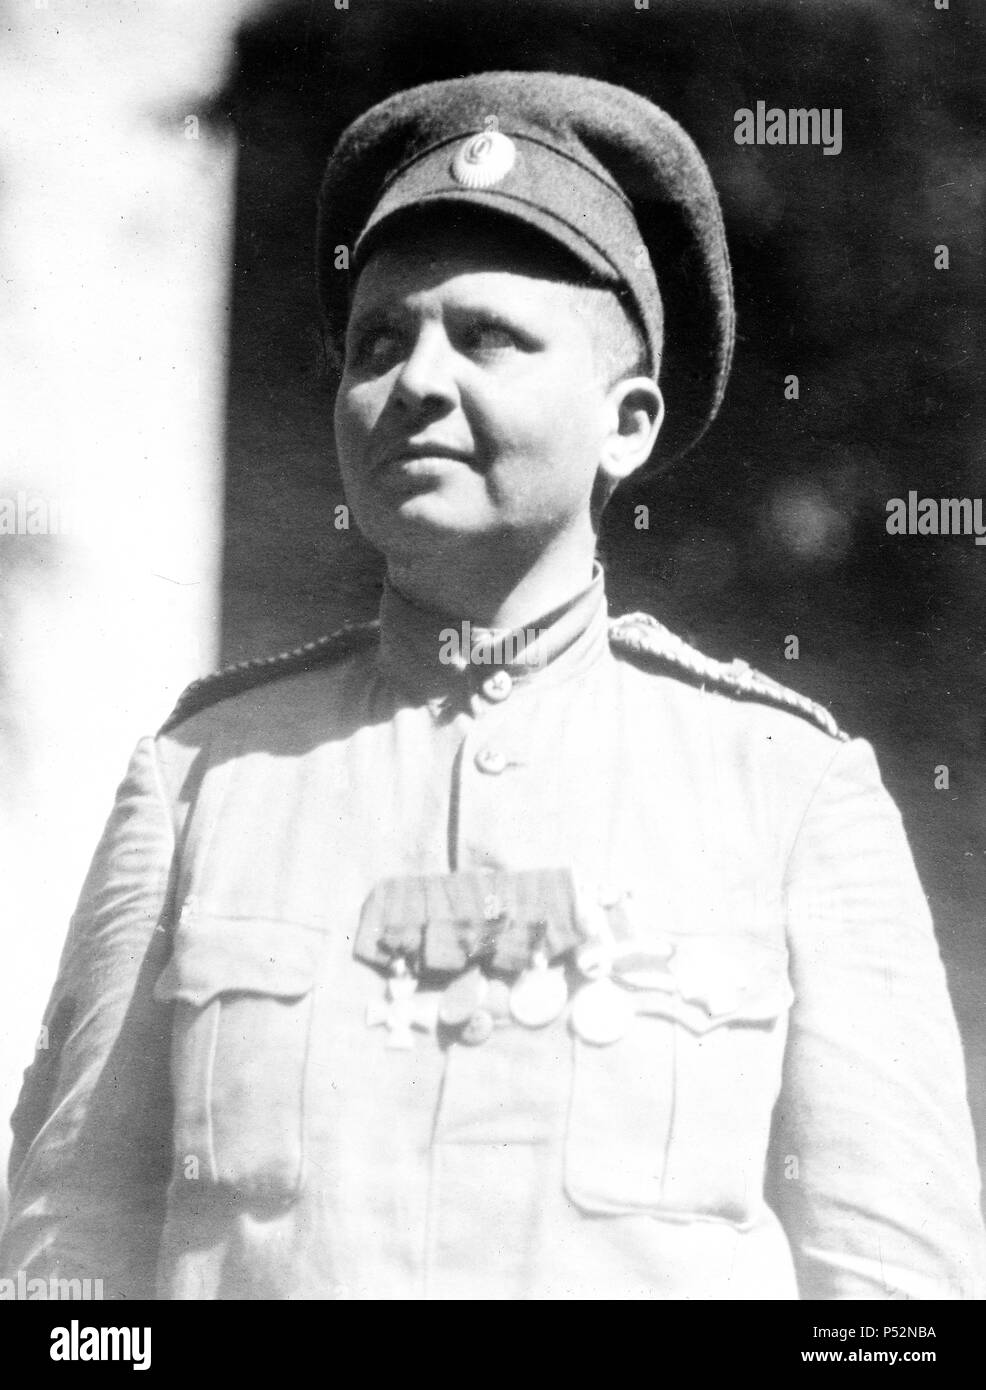 Maria Leontievna Bochkareva (1889-1920), a Russian woman who served as a soldier in World War I and formed the Women's Battalion of Death. Stock Photo